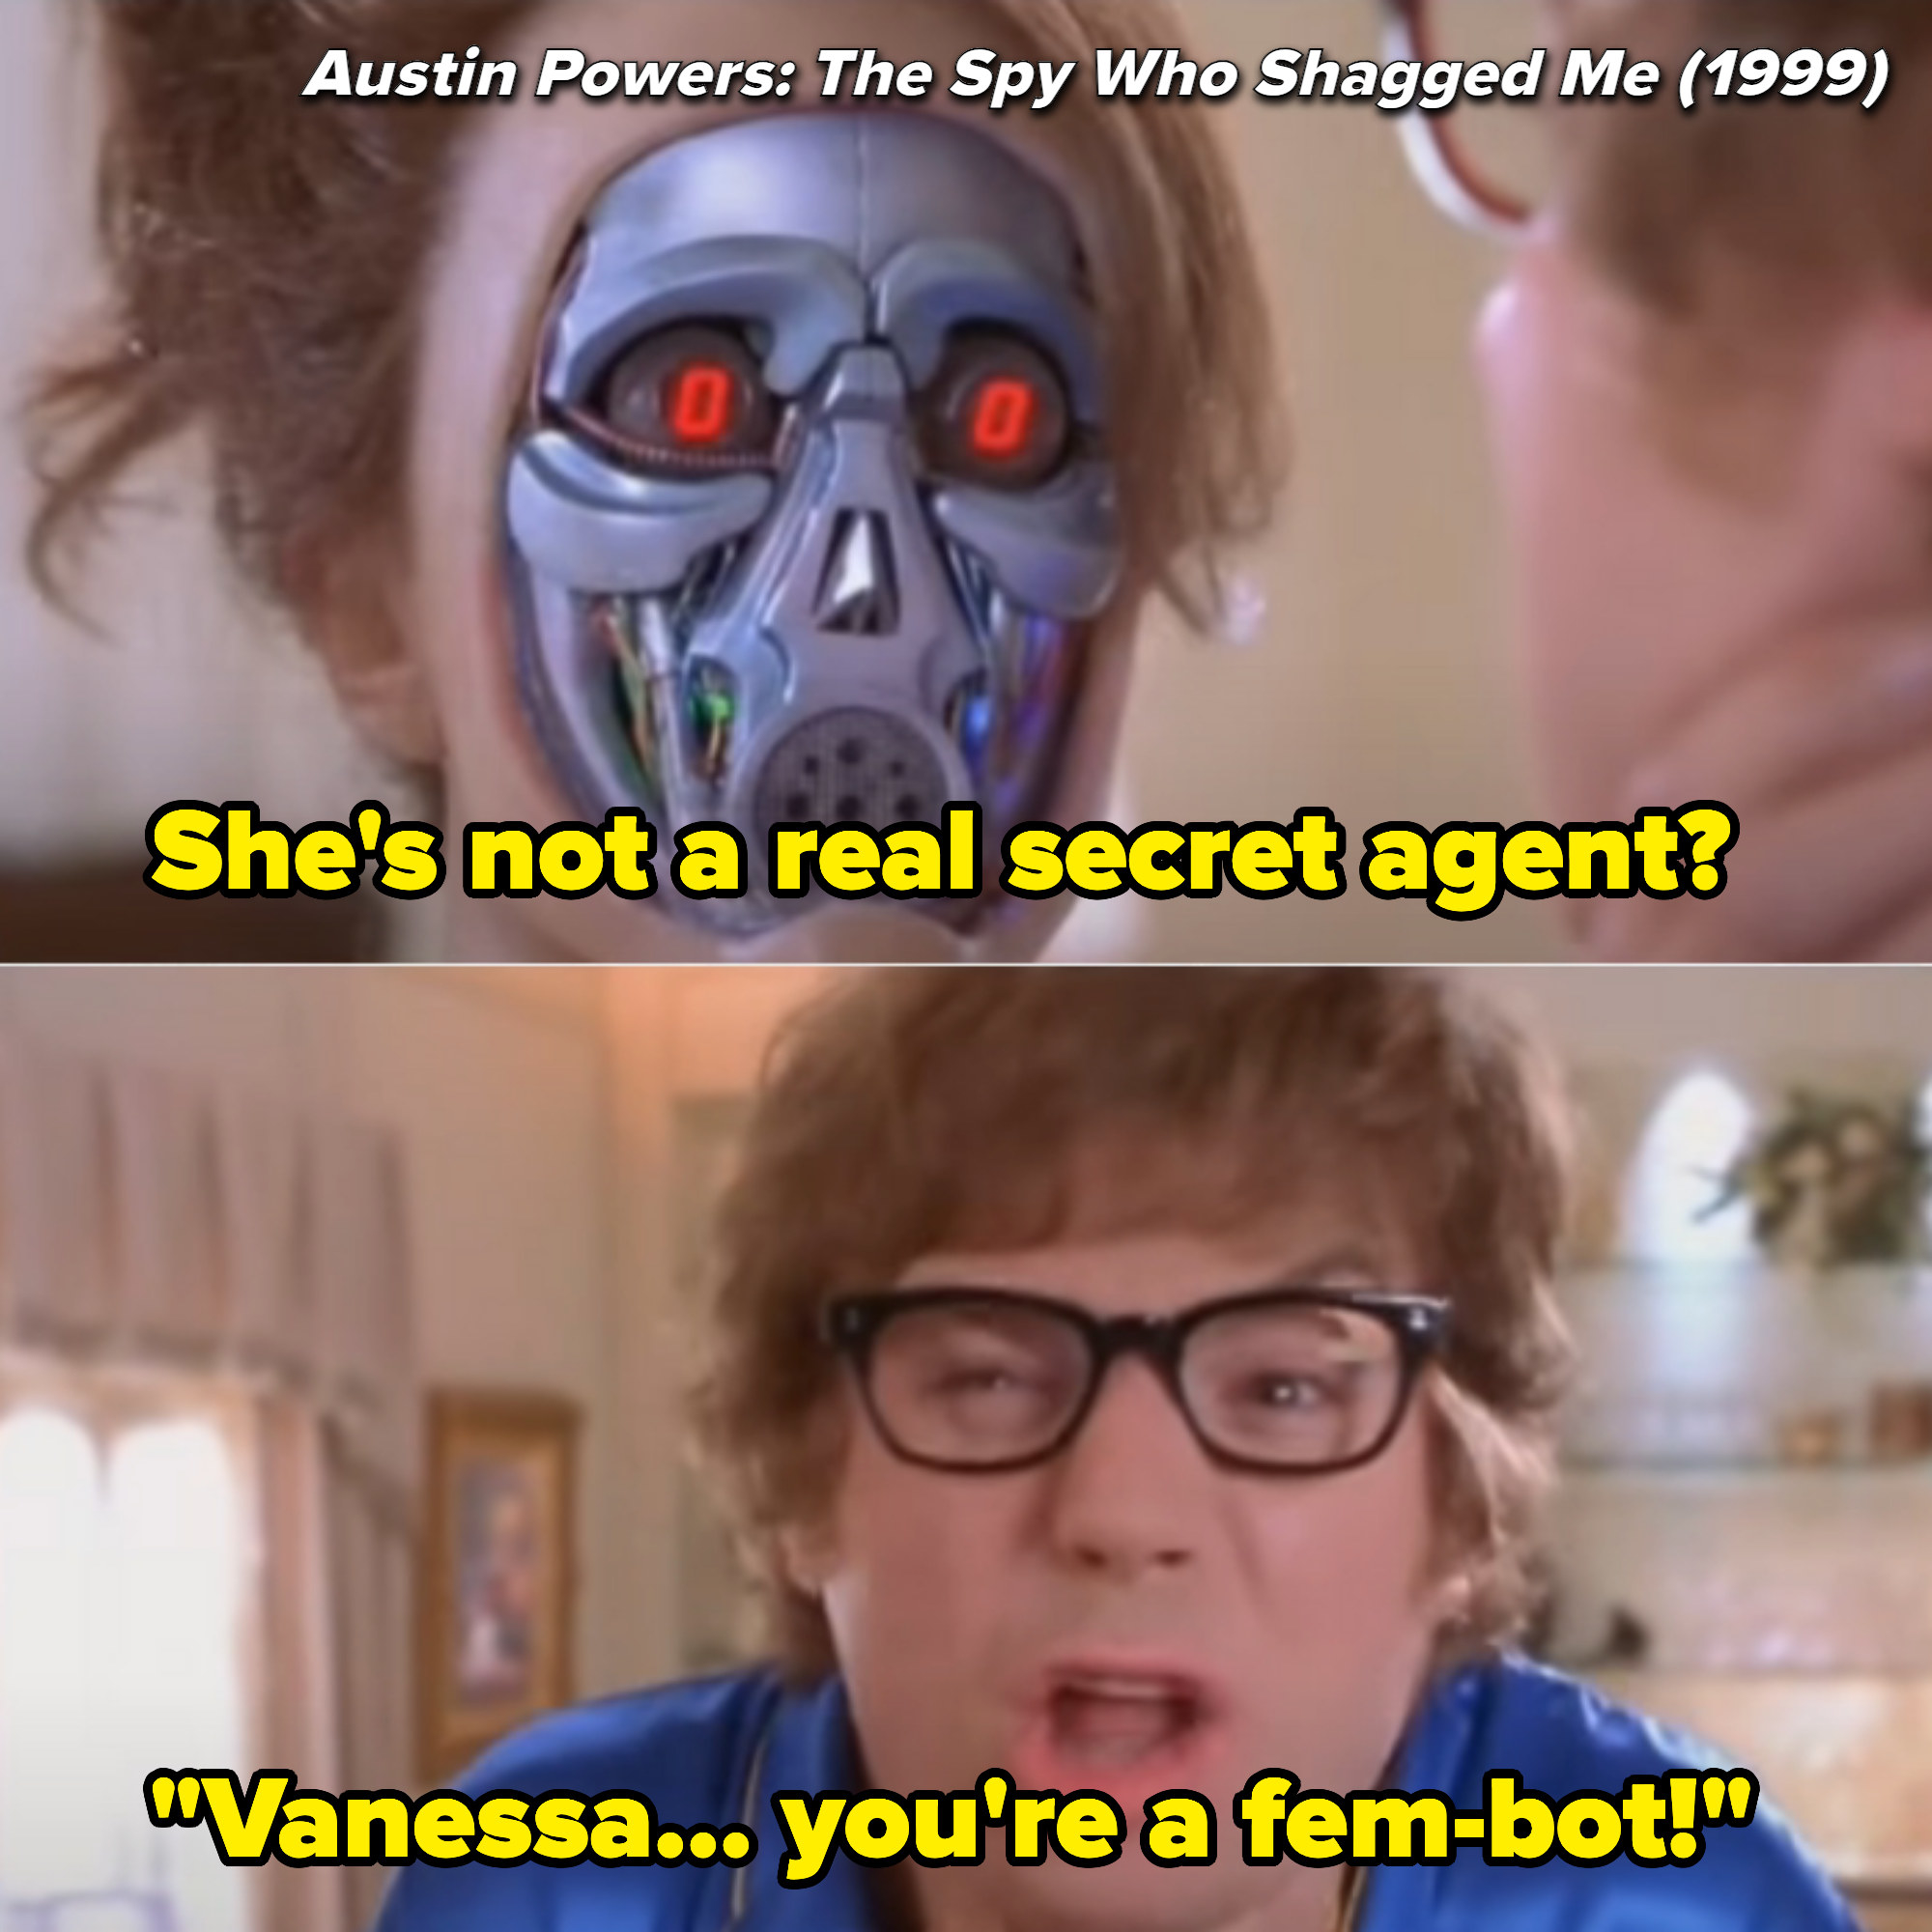 Vanessa&#x27;s robot face reveal and Austin saying &quot;Vanessa, you&#x27;re a fembot&quot;